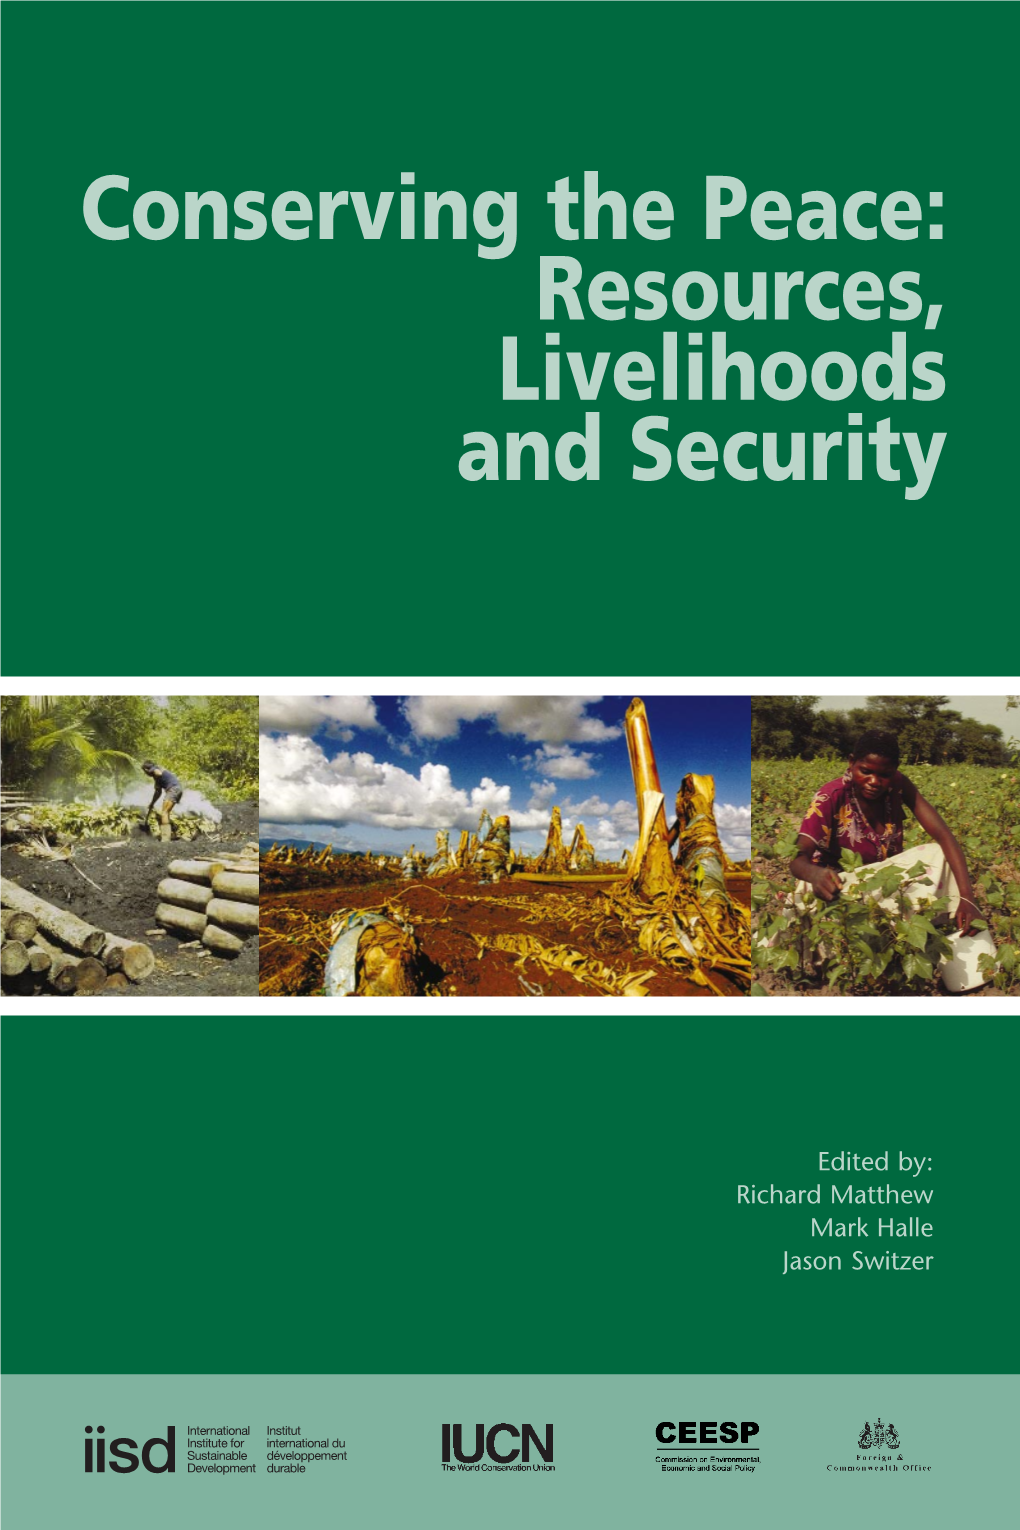 Conserving the Peace: Resources, Livelihoods and Security